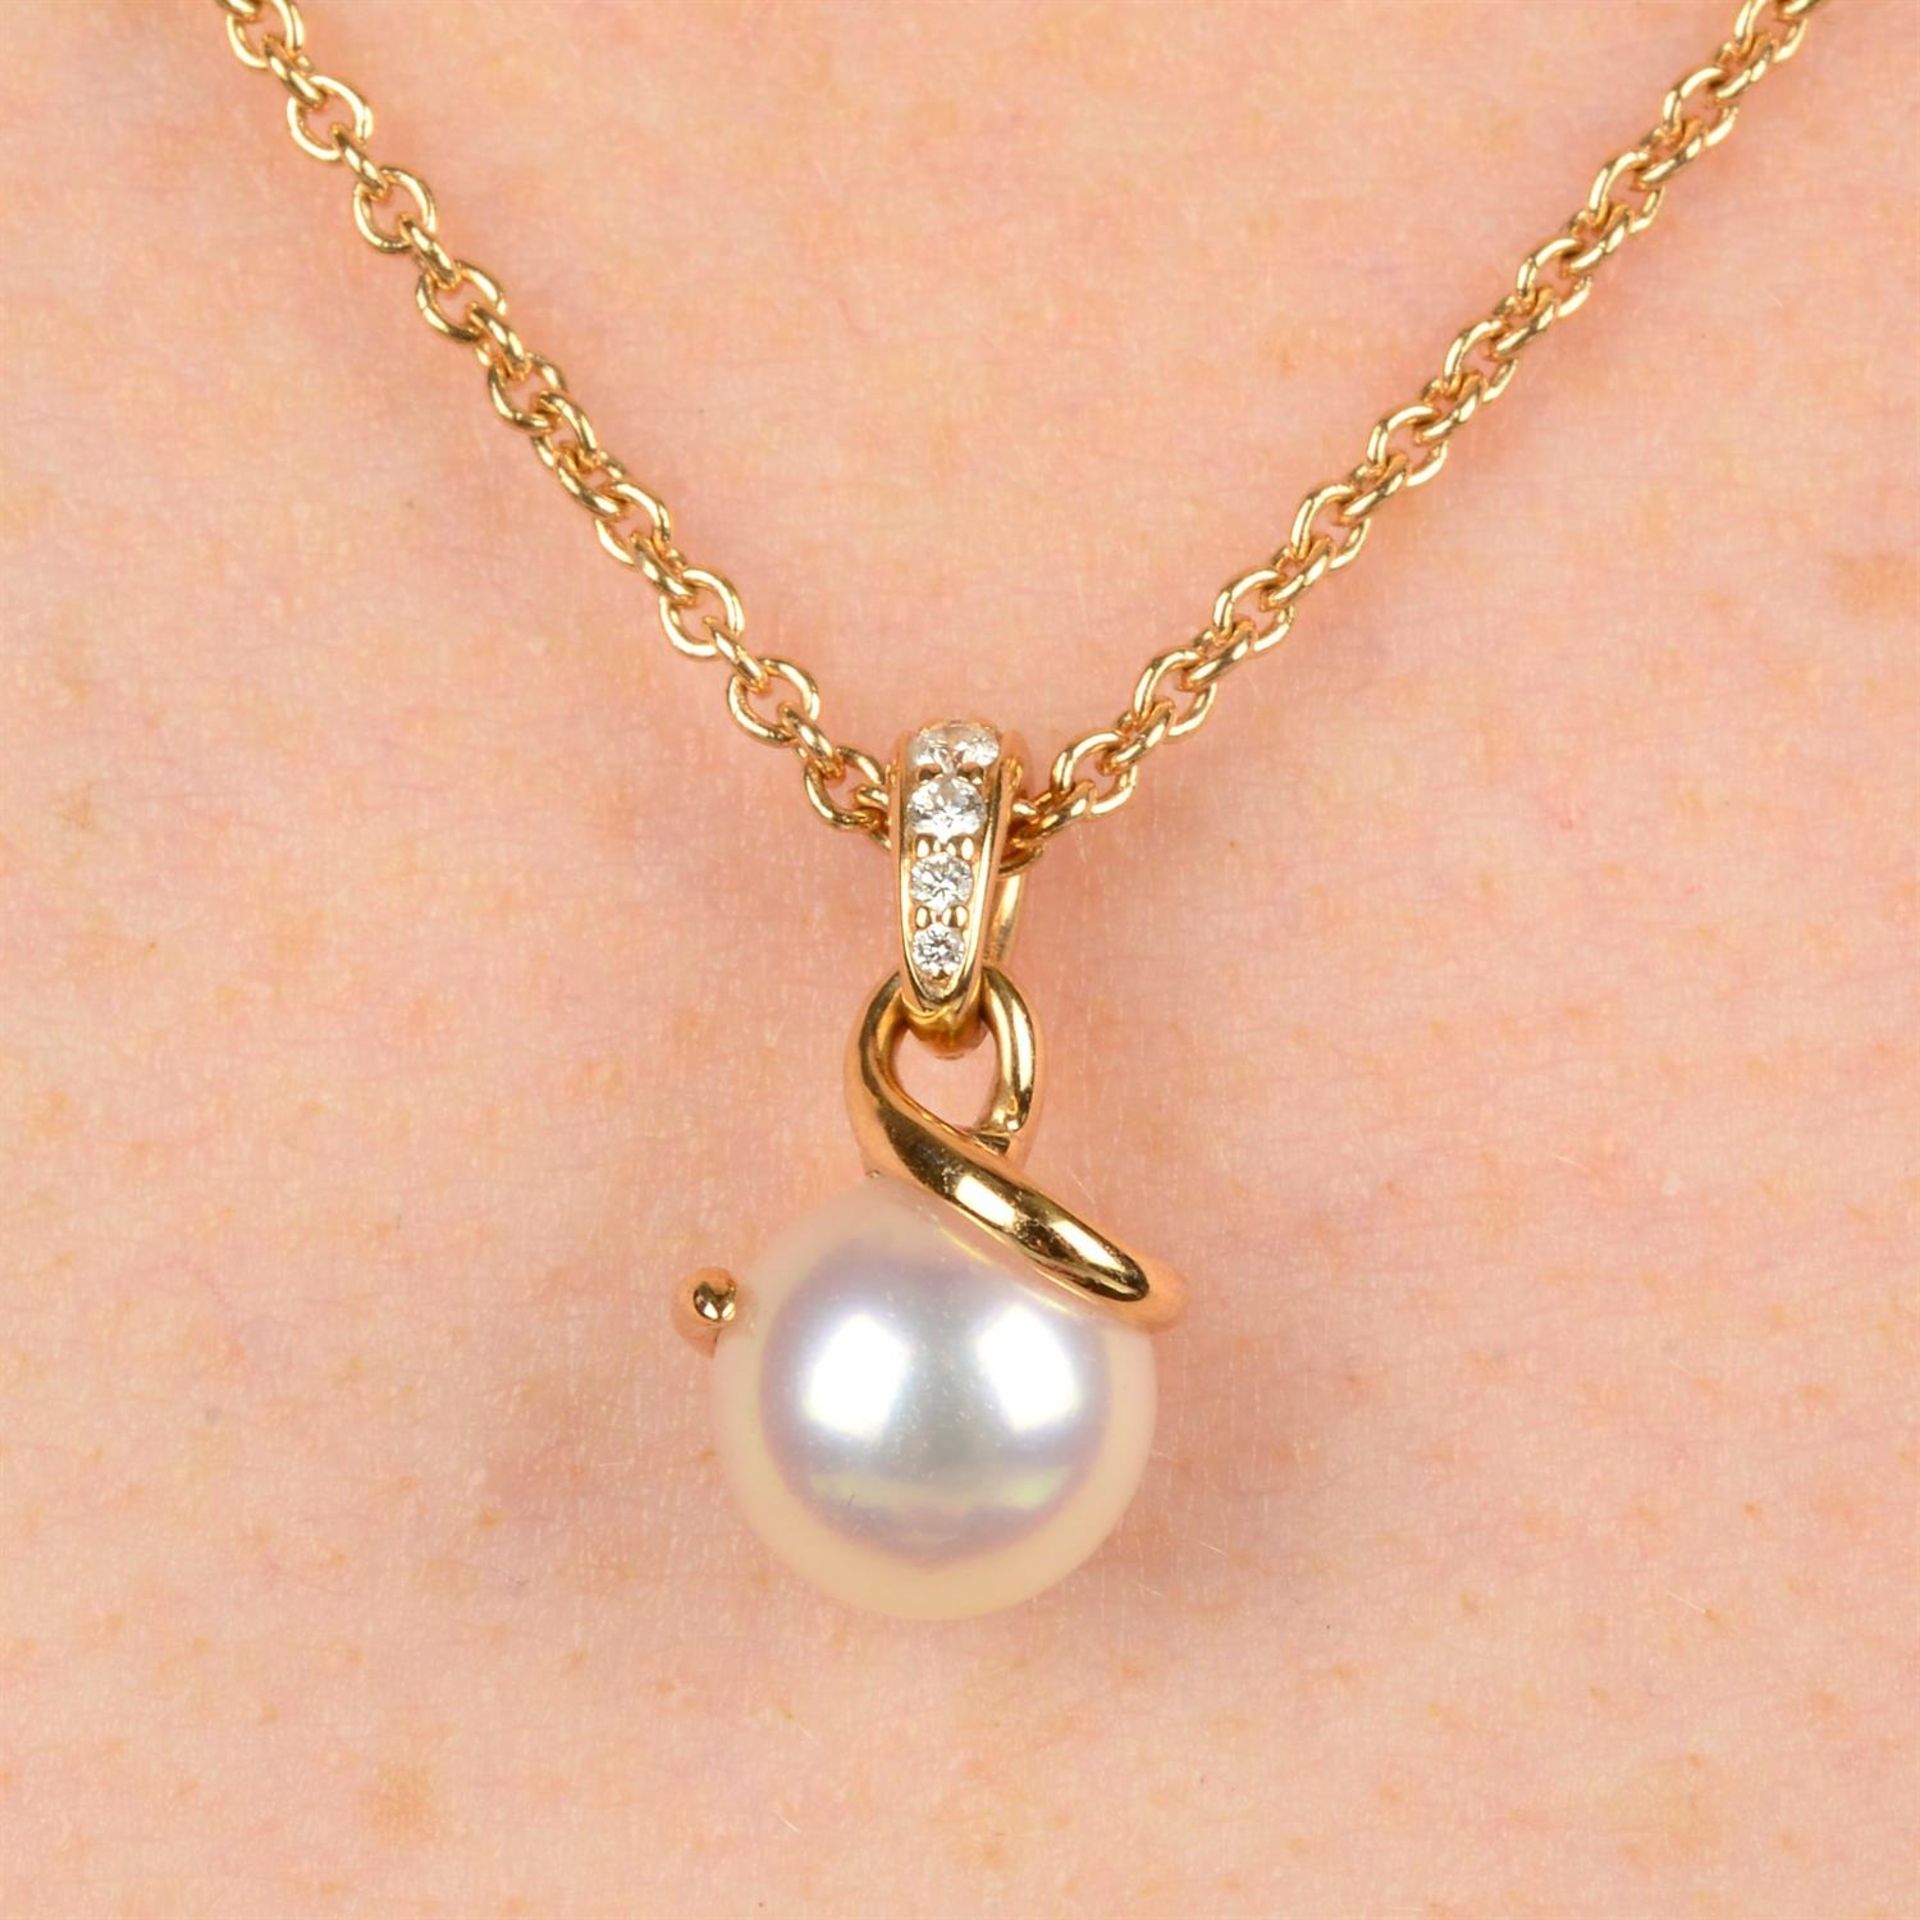 An 18ct gold Akoya cultured pearl and pavé-set diamond 'Twist' pendant, with chain, by Mikimoto.